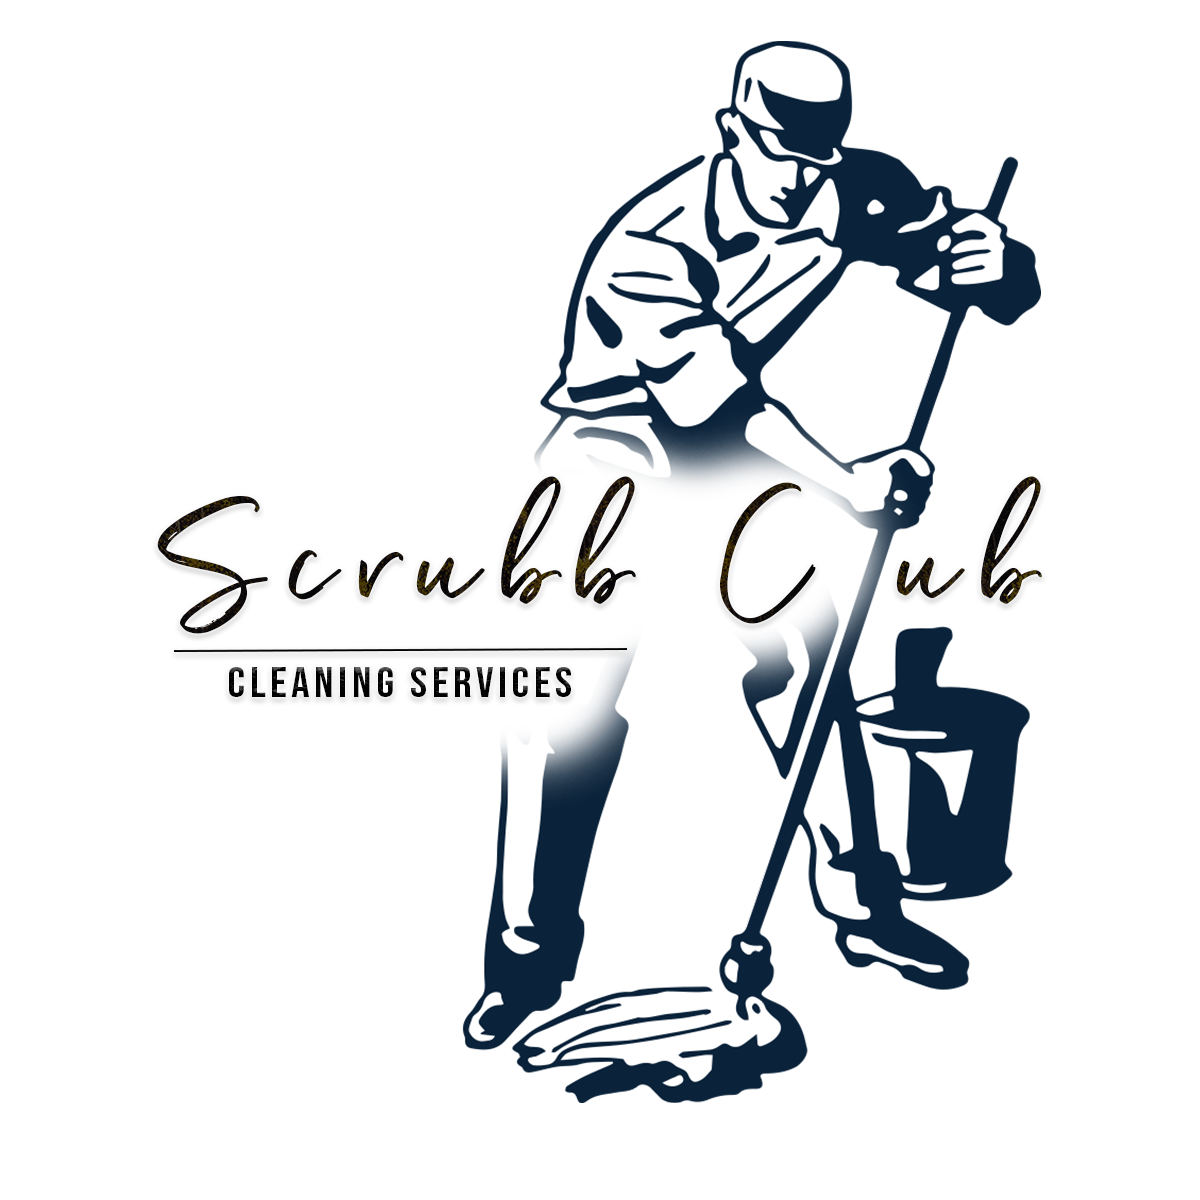 Expert Cleaning Services - Scrubb Club